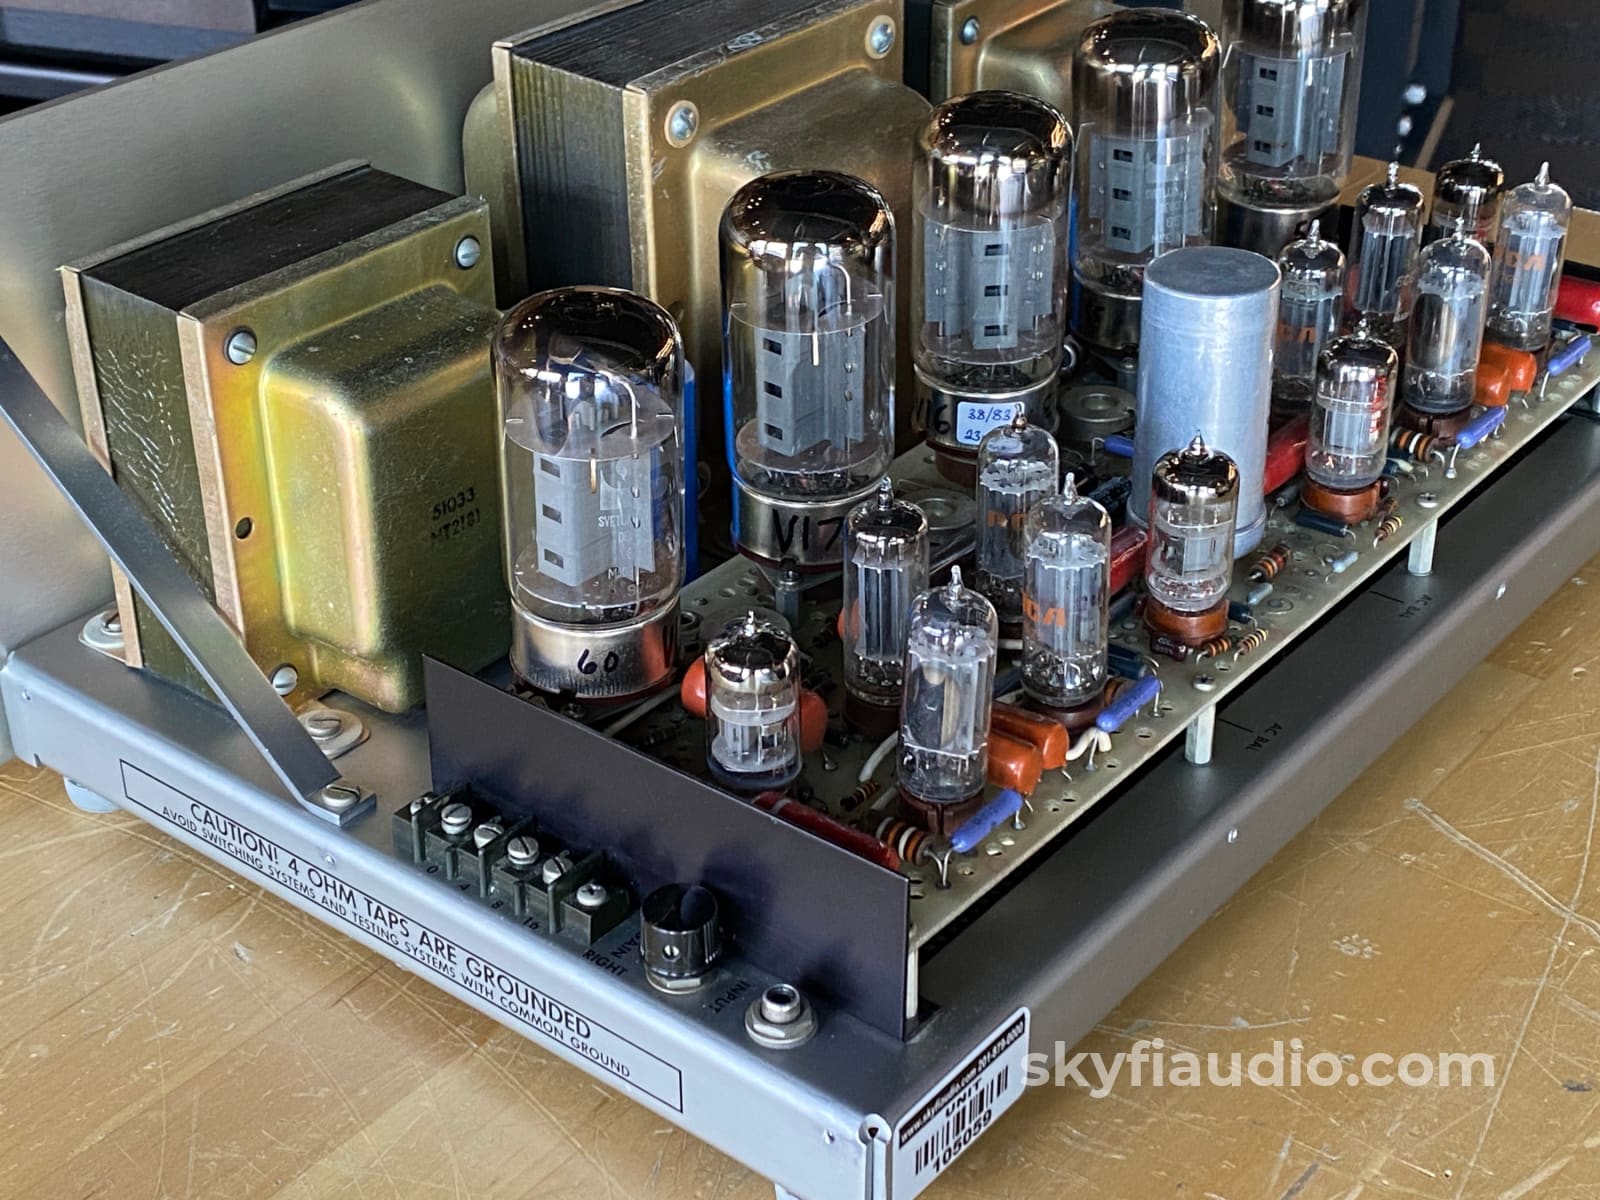 Audio Research D-76 Vintage All-Tube Amplifier